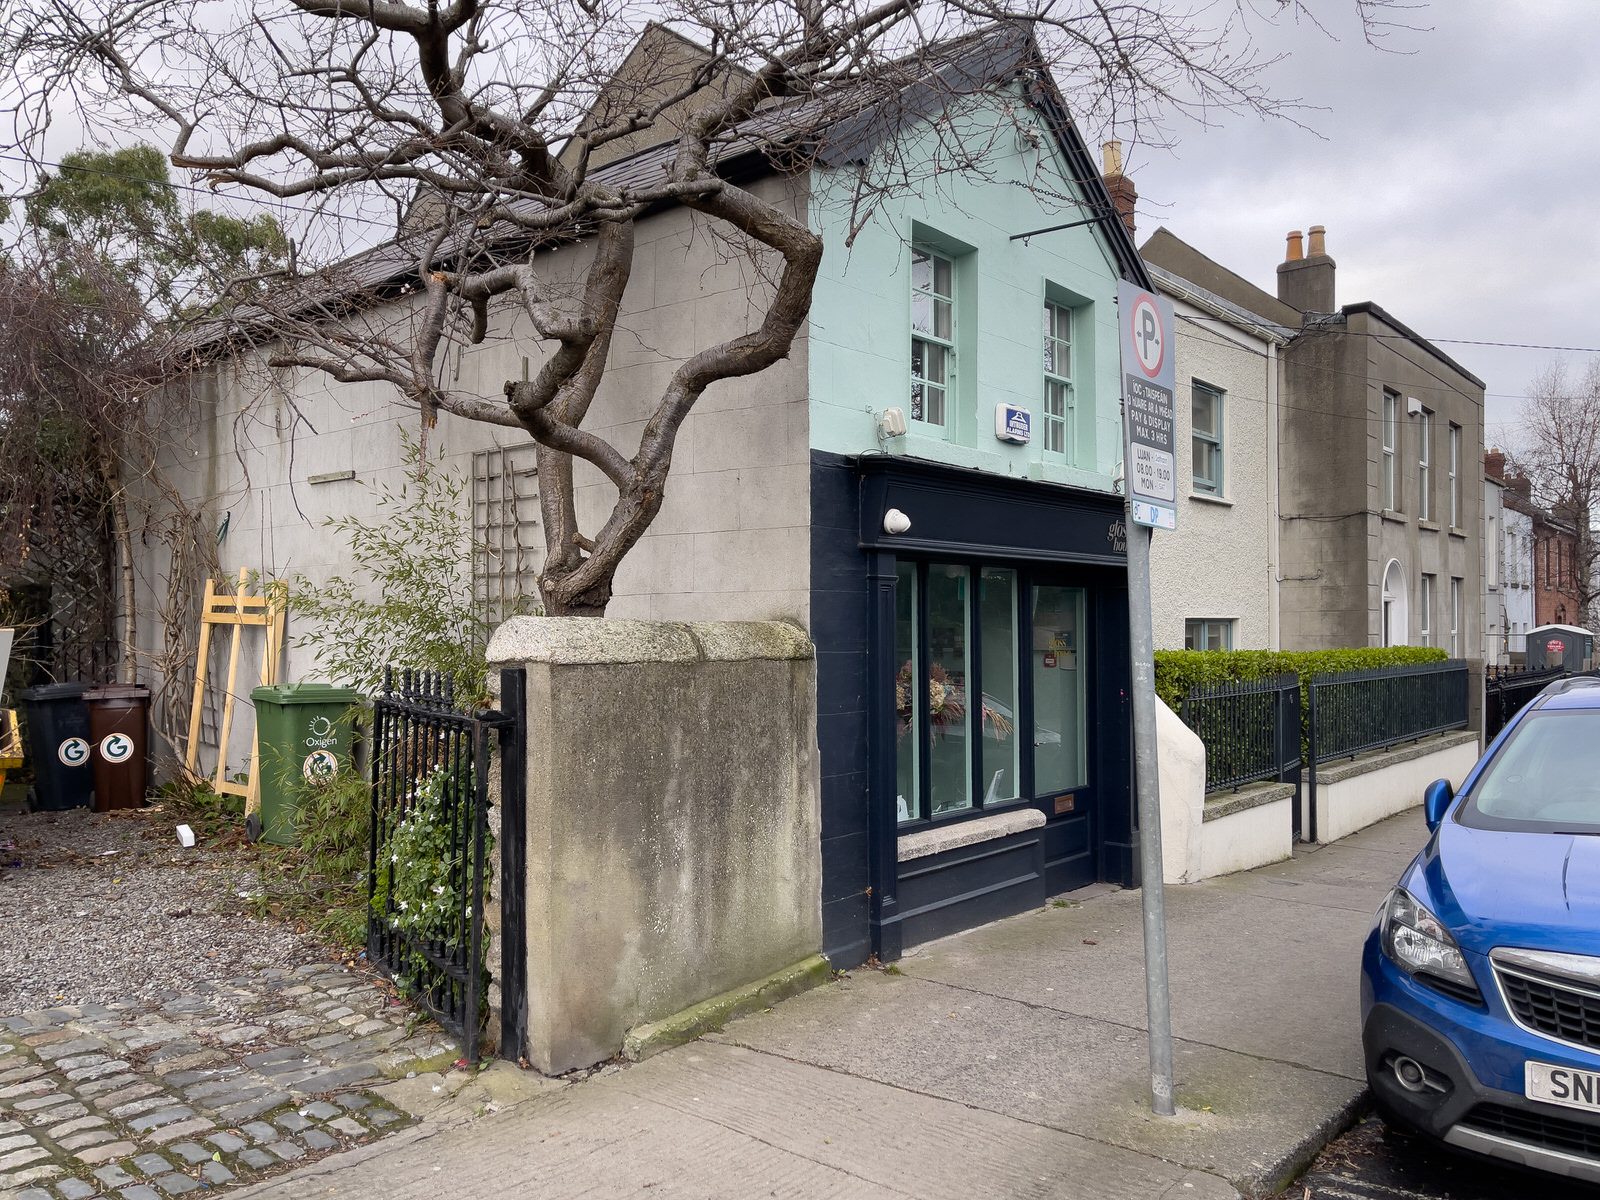 BOOTERSTOWN AVENUE 004